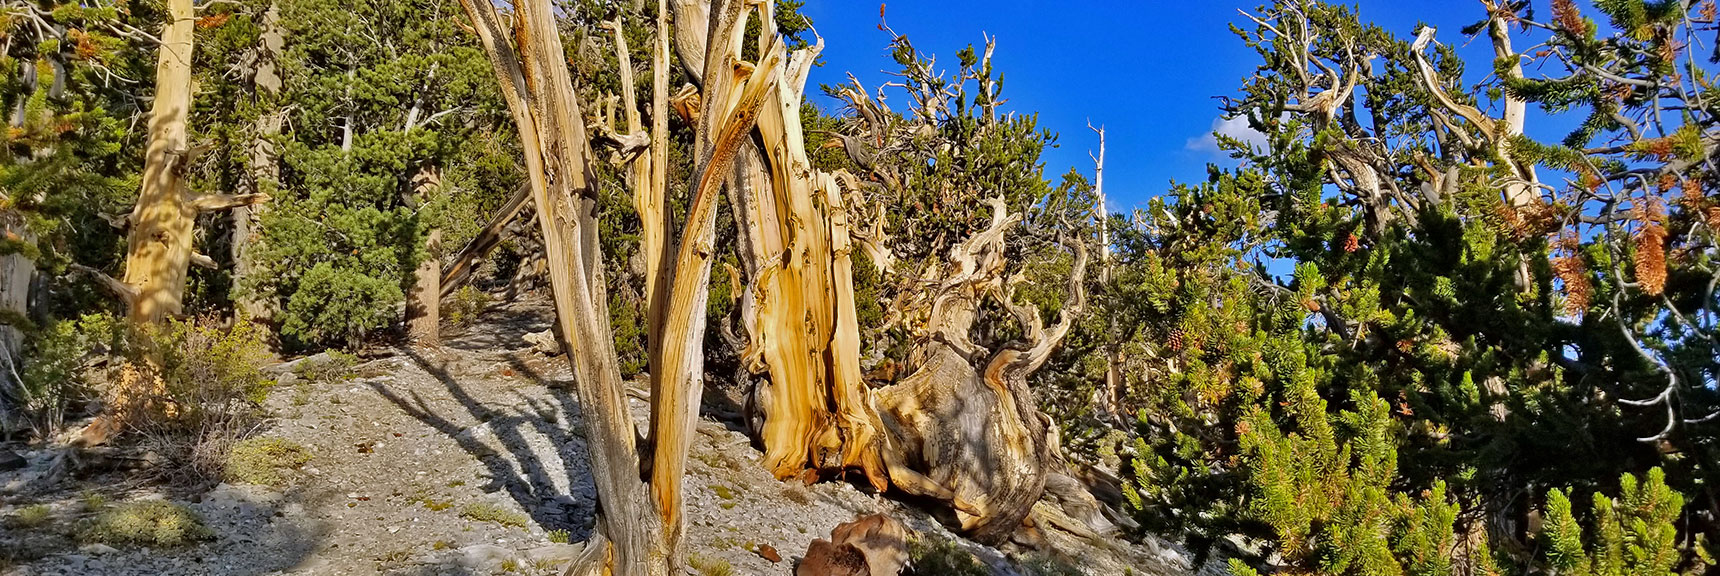 Bristlecone Pines in All Stages of Growth in Late Afternoon Sun on the Bonanza Trail | Bonanza Peak from Lee Canyon via the Lower Bristlecone Pine Trail and Bonanza Trail | Spring Mountains, Nevada